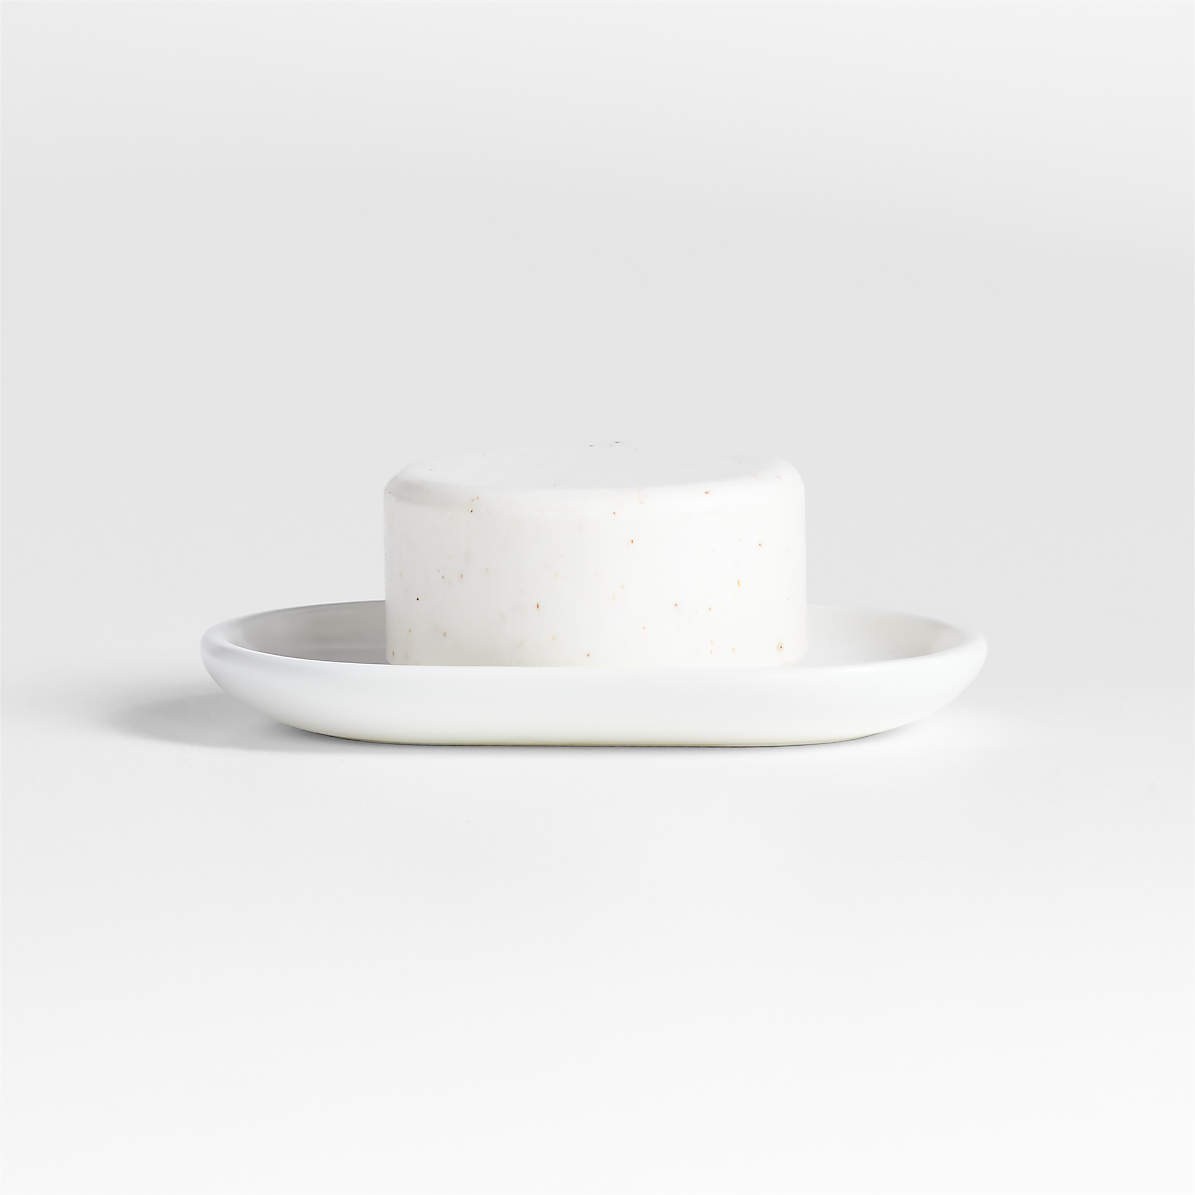 Ceramic Soap Dish with Removable Tray - White